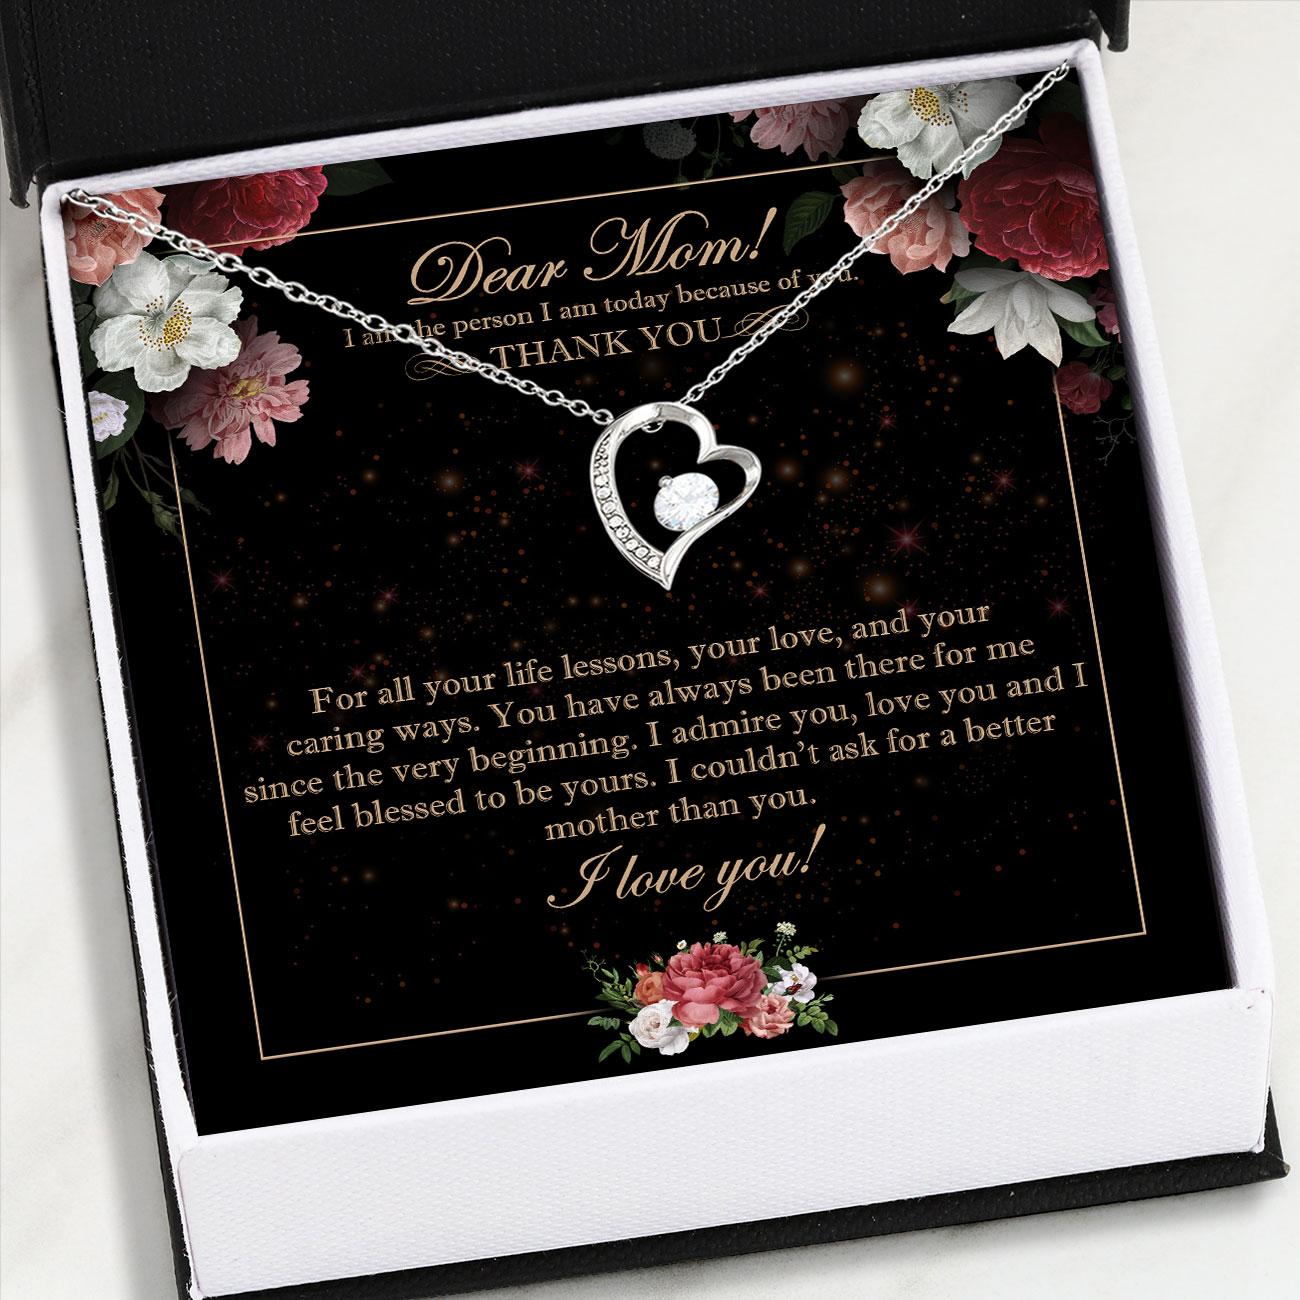 Mom Necklace, Dear My Mom Necklace Card - Forever Love Necklace - Jewelry For Mom, Parents Gifts